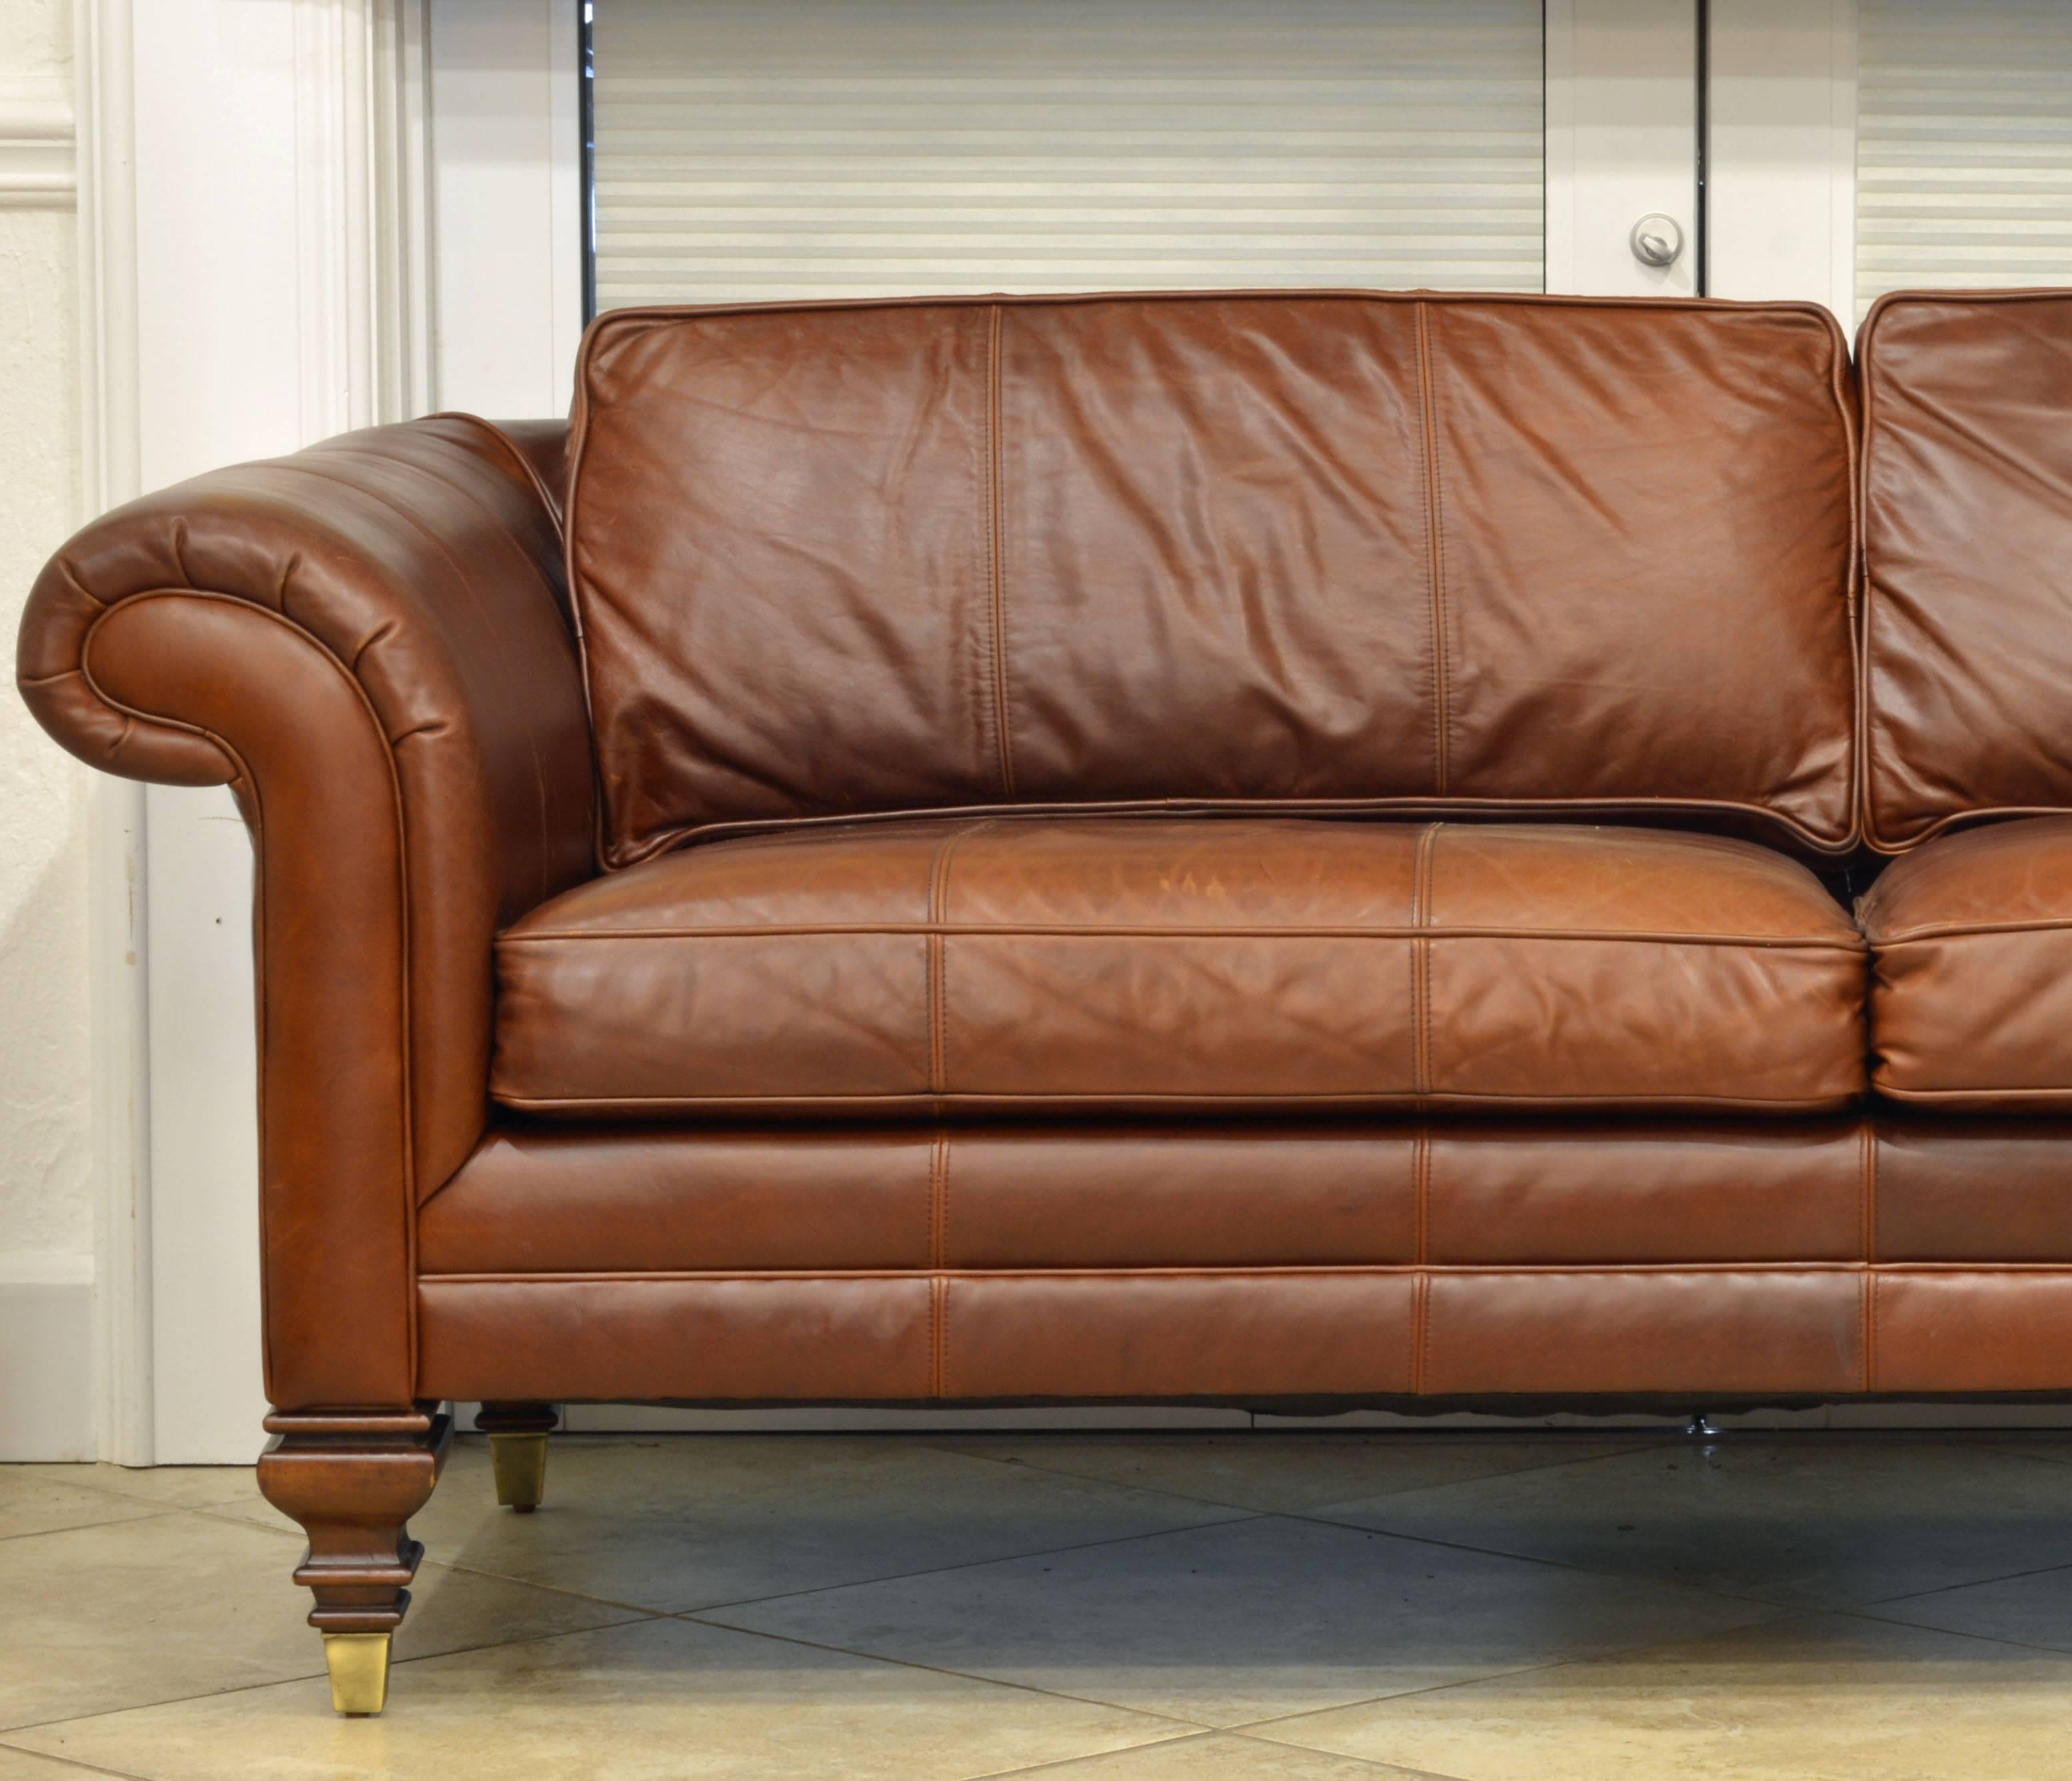 Vintage High Quality Colonial Style Ralph Lauren Leather Sofa with Rolled Arms 1